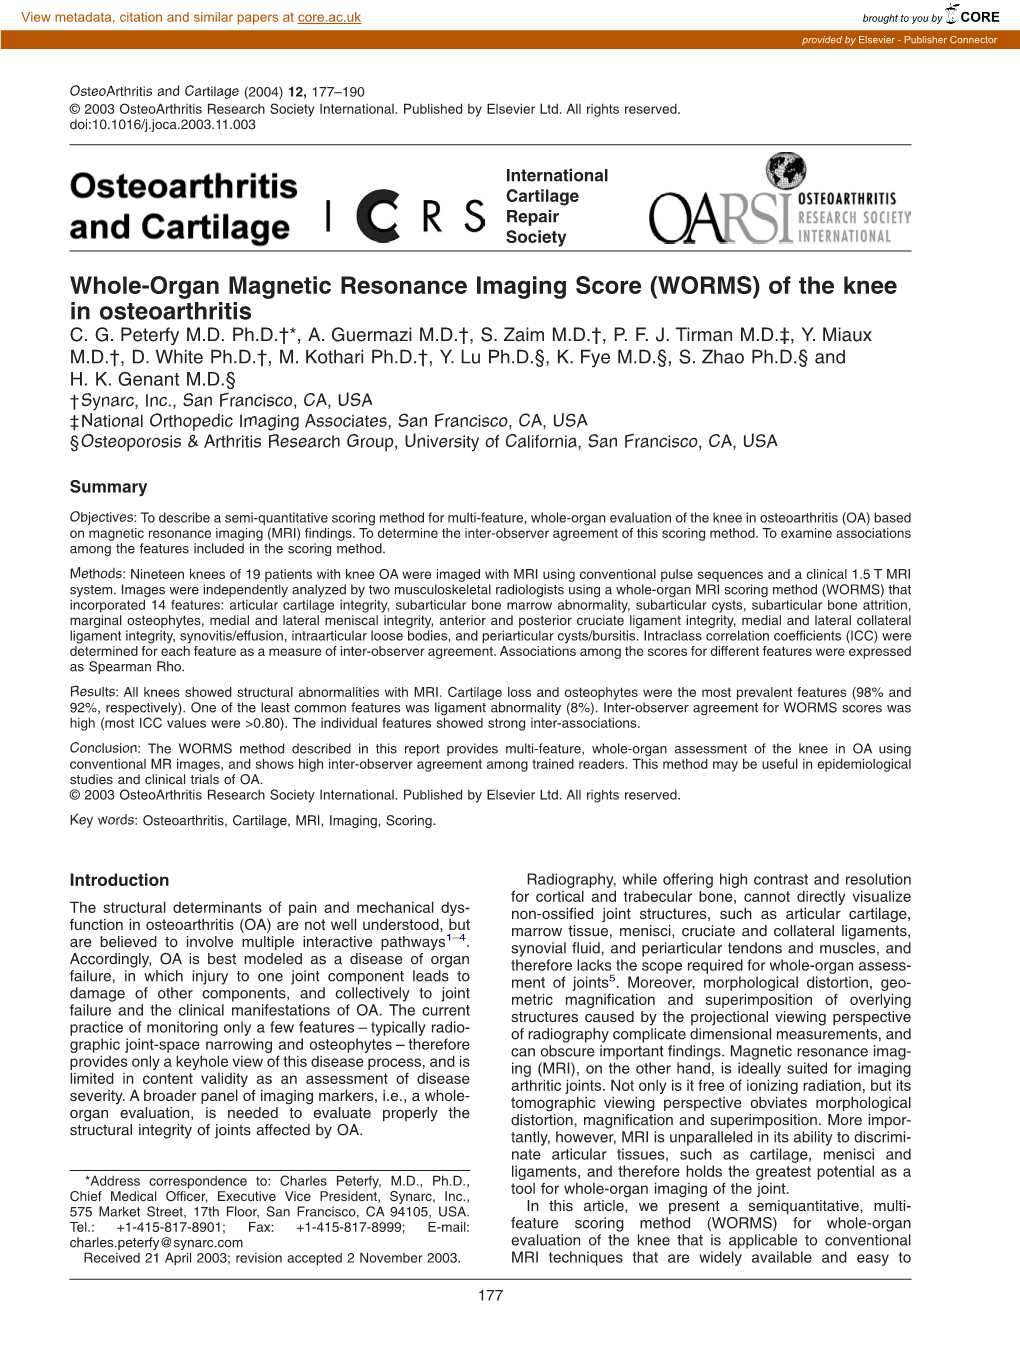 Whole-Organ Magnetic Resonance Imaging Score (WORMS) of the Knee in Osteoarthritis C